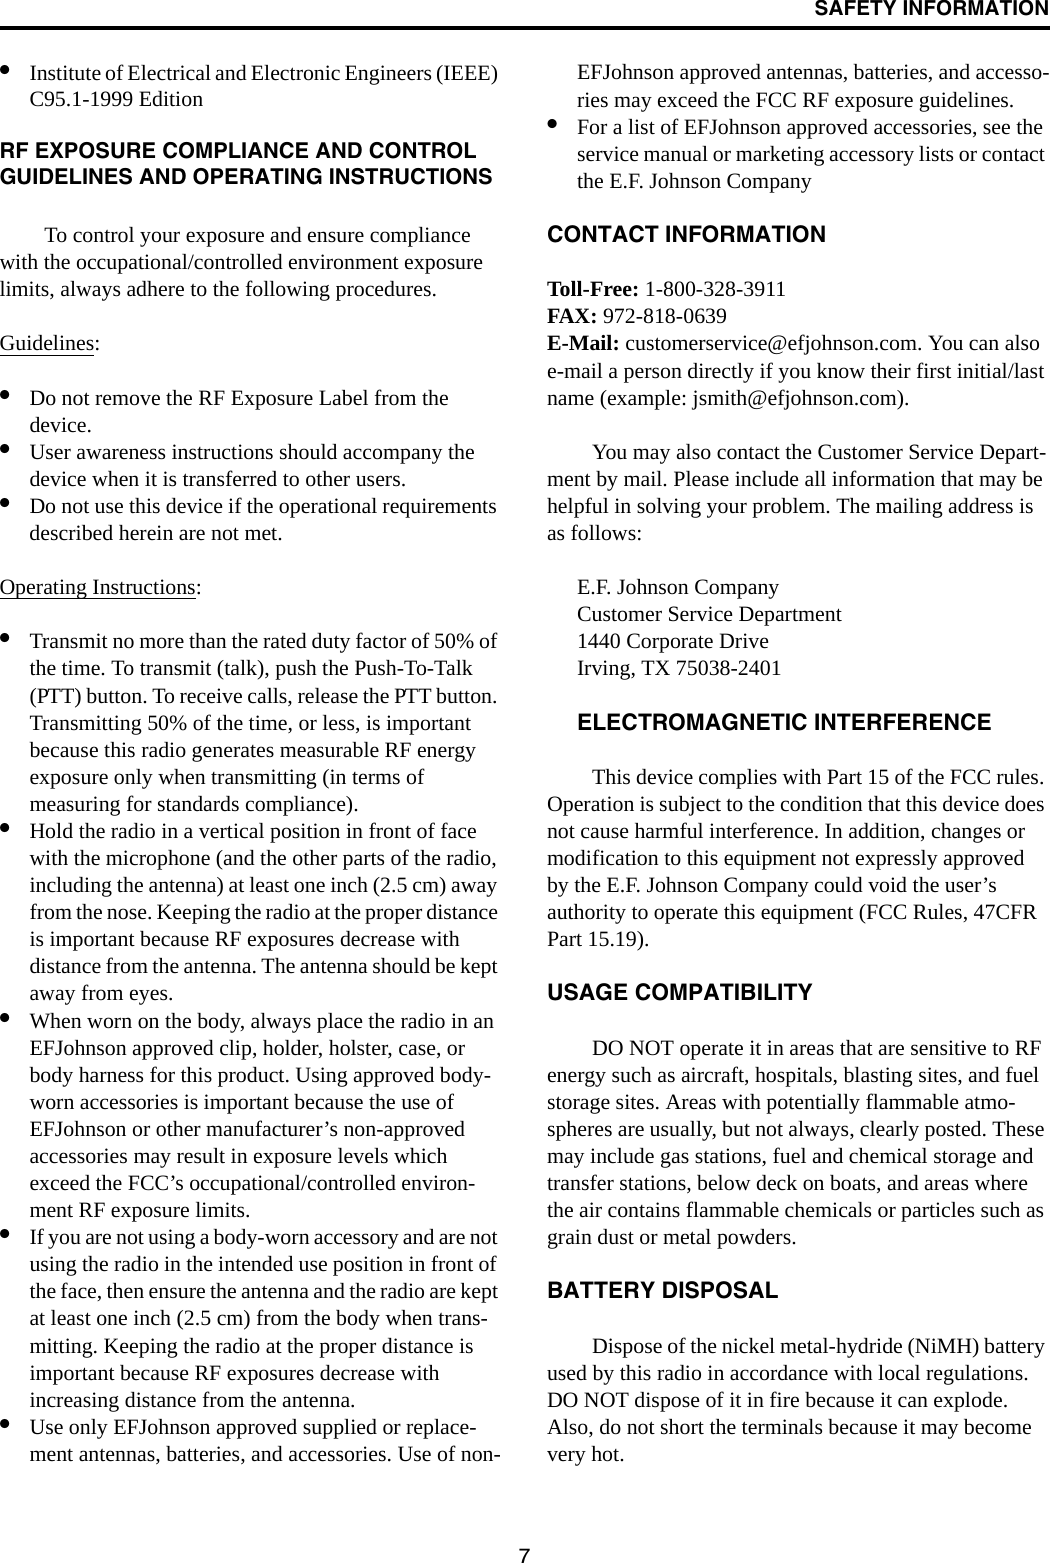 SAFETY INFORMATION7•Institute of Electrical and Electronic Engineers (IEEE) C95.1-1999 Edition RF EXPOSURE COMPLIANCE AND CONTROL GUIDELINES AND OPERATING INSTRUCTIONSTo control your exposure and ensure compliance with the occupational/controlled environment exposure limits, always adhere to the following procedures.Guidelines:•Do not remove the RF Exposure Label from the device. •User awareness instructions should accompany the device when it is transferred to other users. •Do not use this device if the operational requirements described herein are not met. Operating Instructions: •Transmit no more than the rated duty factor of 50% of the time. To transmit (talk), push the Push-To-Talk (PTT) button. To receive calls, release the PTT button. Transmitting 50% of the time, or less, is important because this radio generates measurable RF energy exposure only when transmitting (in terms of measuring for standards compliance).•Hold the radio in a vertical position in front of face with the microphone (and the other parts of the radio, including the antenna) at least one inch (2.5 cm) away from the nose. Keeping the radio at the proper distance is important because RF exposures decrease with distance from the antenna. The antenna should be kept away from eyes. •When worn on the body, always place the radio in an EFJohnson approved clip, holder, holster, case, or body harness for this product. Using approved body-worn accessories is important because the use of EFJohnson or other manufacturer’s non-approved accessories may result in exposure levels which exceed the FCC’s occupational/controlled environ-ment RF exposure limits. •If you are not using a body-worn accessory and are not using the radio in the intended use position in front of the face, then ensure the antenna and the radio are kept at least one inch (2.5 cm) from the body when trans-mitting. Keeping the radio at the proper distance is important because RF exposures decrease with increasing distance from the antenna. •Use only EFJohnson approved supplied or replace-ment antennas, batteries, and accessories. Use of non-EFJohnson approved antennas, batteries, and accesso-ries may exceed the FCC RF exposure guidelines. •For a list of EFJohnson approved accessories, see the service manual or marketing accessory lists or contact the E.F. Johnson Company CONTACT INFORMATIONToll-Free: 1-800-328-3911FAX: 972-818-0639E-Mail: customerservice@efjohnson.com. You can also e-mail a person directly if you know their first initial/last name (example: jsmith@efjohnson.com).You may also contact the Customer Service Depart-ment by mail. Please include all information that may be helpful in solving your problem. The mailing address is as follows: E.F. Johnson CompanyCustomer Service Department 1440 Corporate DriveIrving, TX 75038-2401ELECTROMAGNETIC INTERFERENCE This device complies with Part 15 of the FCC rules. Operation is subject to the condition that this device does not cause harmful interference. In addition, changes or modification to this equipment not expressly approved by the E.F. Johnson Company could void the user’s authority to operate this equipment (FCC Rules, 47CFR Part 15.19). USAGE COMPATIBILITYDO NOT operate it in areas that are sensitive to RF energy such as aircraft, hospitals, blasting sites, and fuel storage sites. Areas with potentially flammable atmo-spheres are usually, but not always, clearly posted. These may include gas stations, fuel and chemical storage and transfer stations, below deck on boats, and areas where the air contains flammable chemicals or particles such as grain dust or metal powders. BATTERY DISPOSALDispose of the nickel metal-hydride (NiMH) battery used by this radio in accordance with local regulations. DO NOT dispose of it in fire because it can explode. Also, do not short the terminals because it may become very hot.